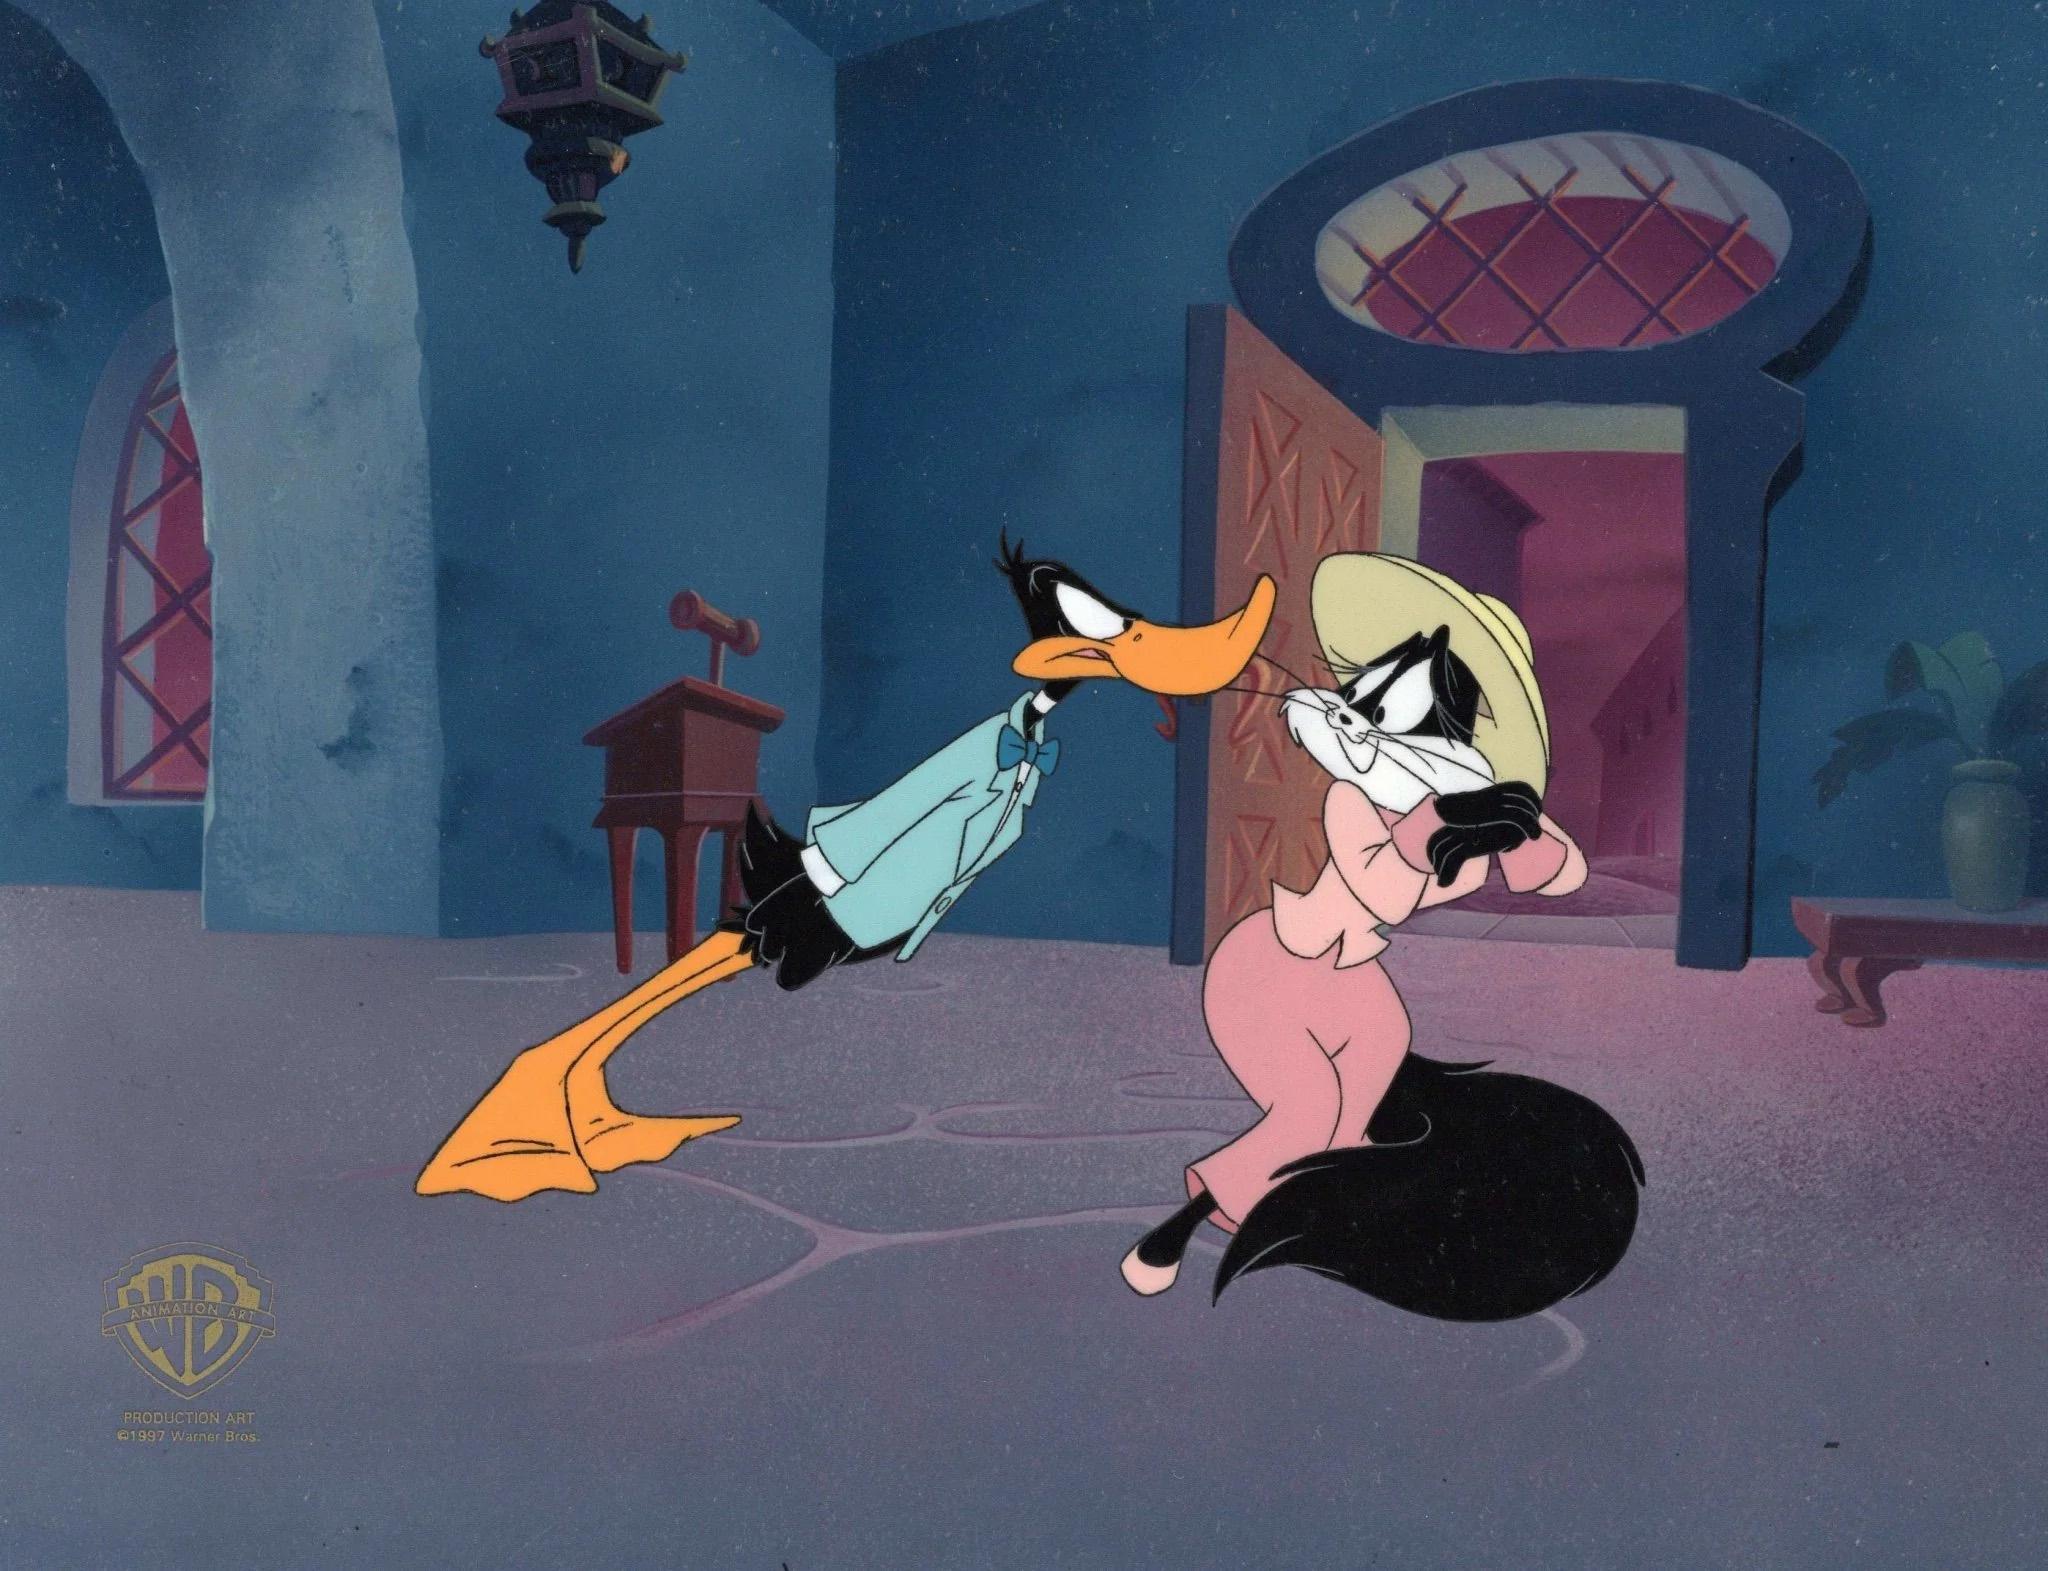 Looney Tunes Original Production Cel: Daffy Duck and Penelope Pussycat